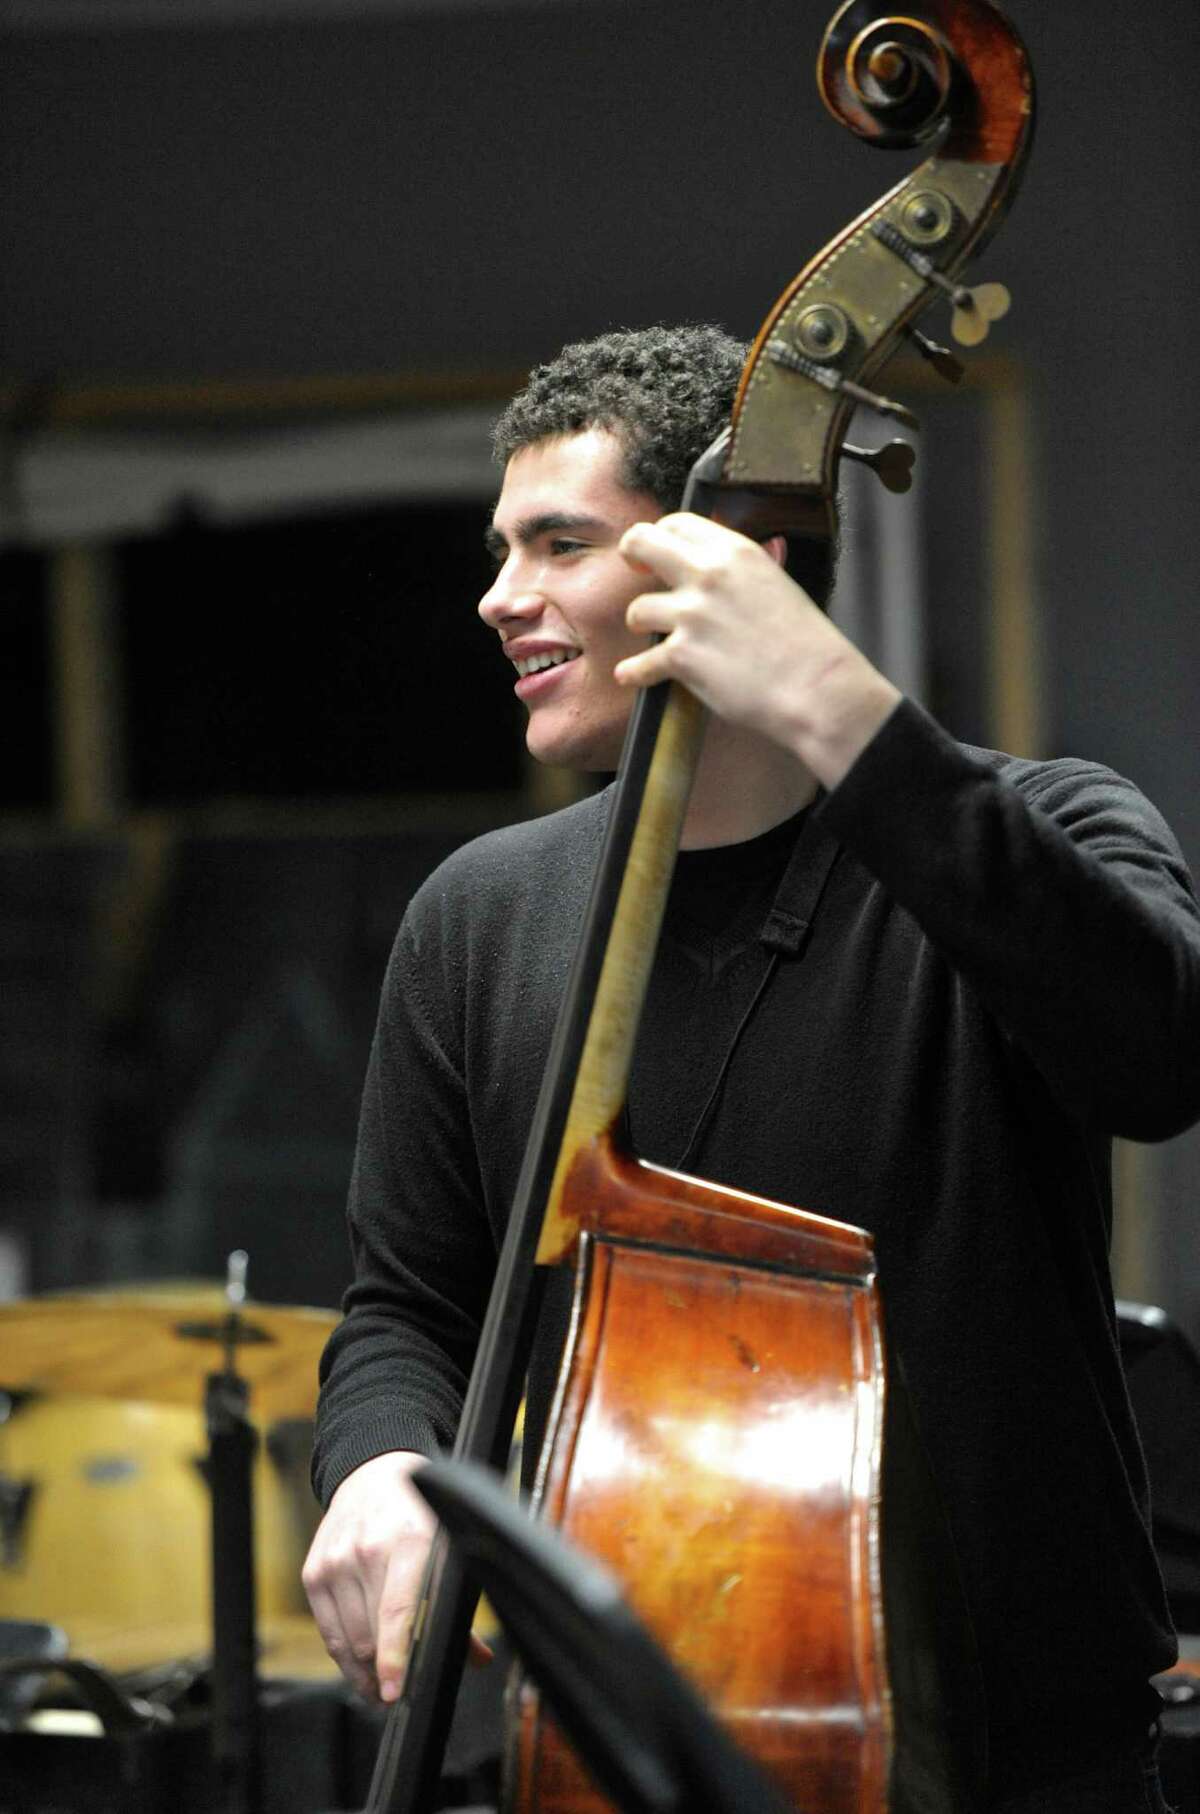 Senior Ben Fitzpatrick, 17, plays the bass during orchestra class at Bethel High School. He will be one of only 32 high school students from across the country to travel to Los Angeles for a week long music program, "2016 Grammy Camp - Jazz Session." Fitzpatrick was chosen for his baritone saxophone talent but he also plays the bass, piano and clarinet. Wednesday, February 3, 2016, in Bethel, Conn.